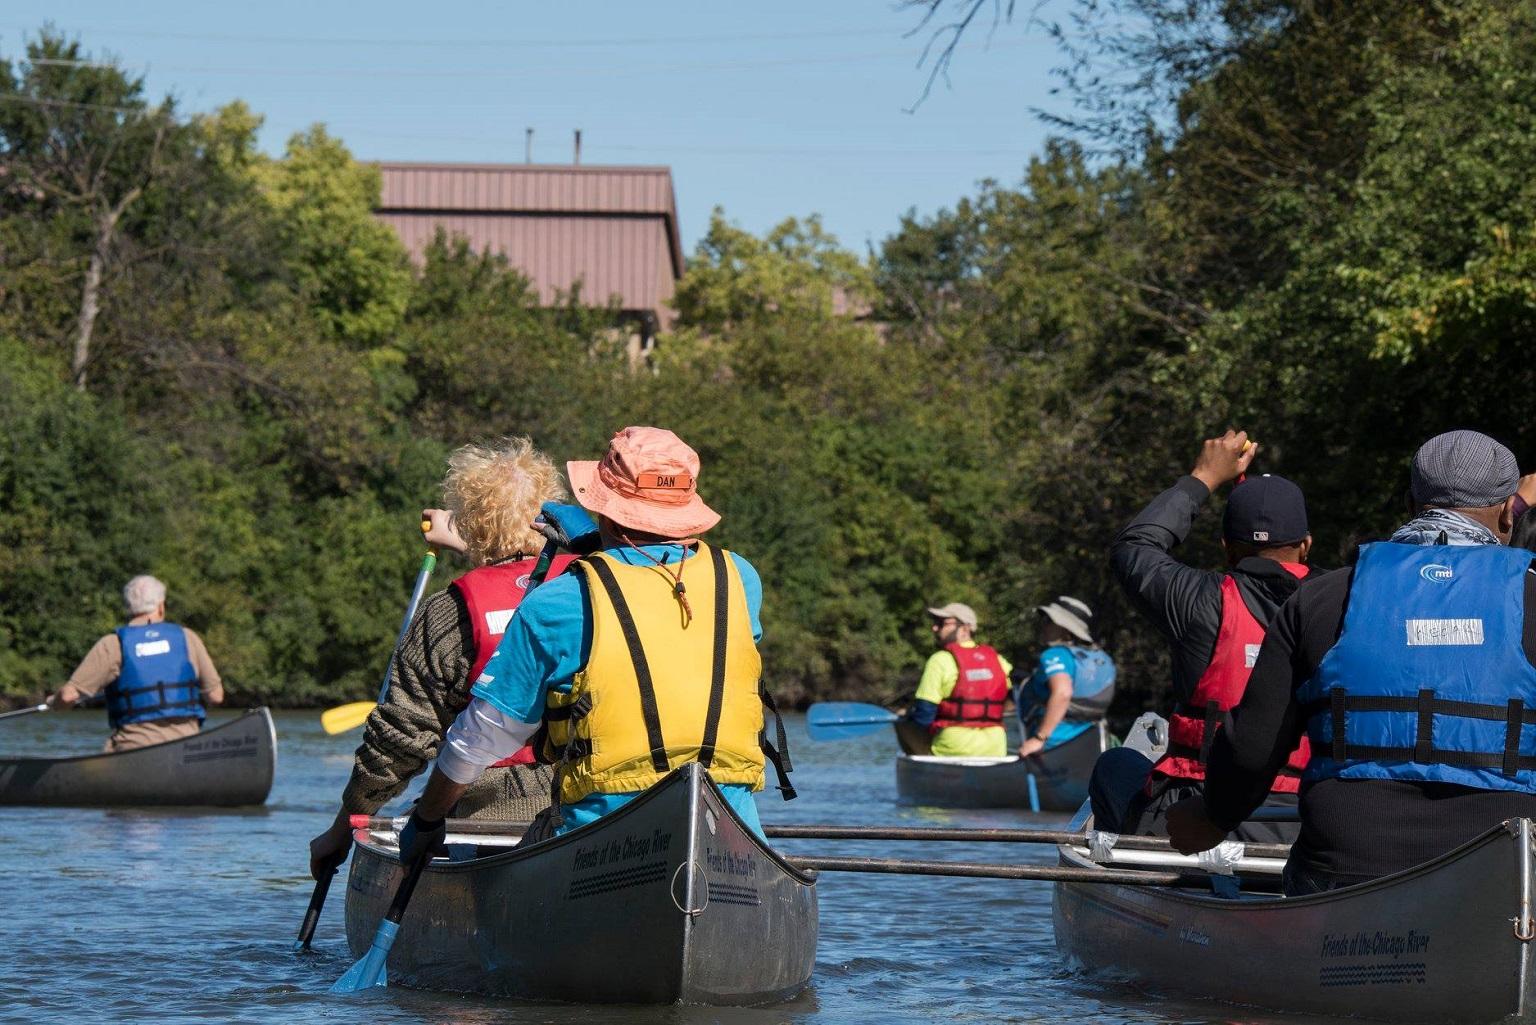 The Lathrop Riverfront Group held a kick-off paddle event along the Chicago River in fall 2018. (Courtesy Metropolitan Water Reclamation District of Greater Chicago)